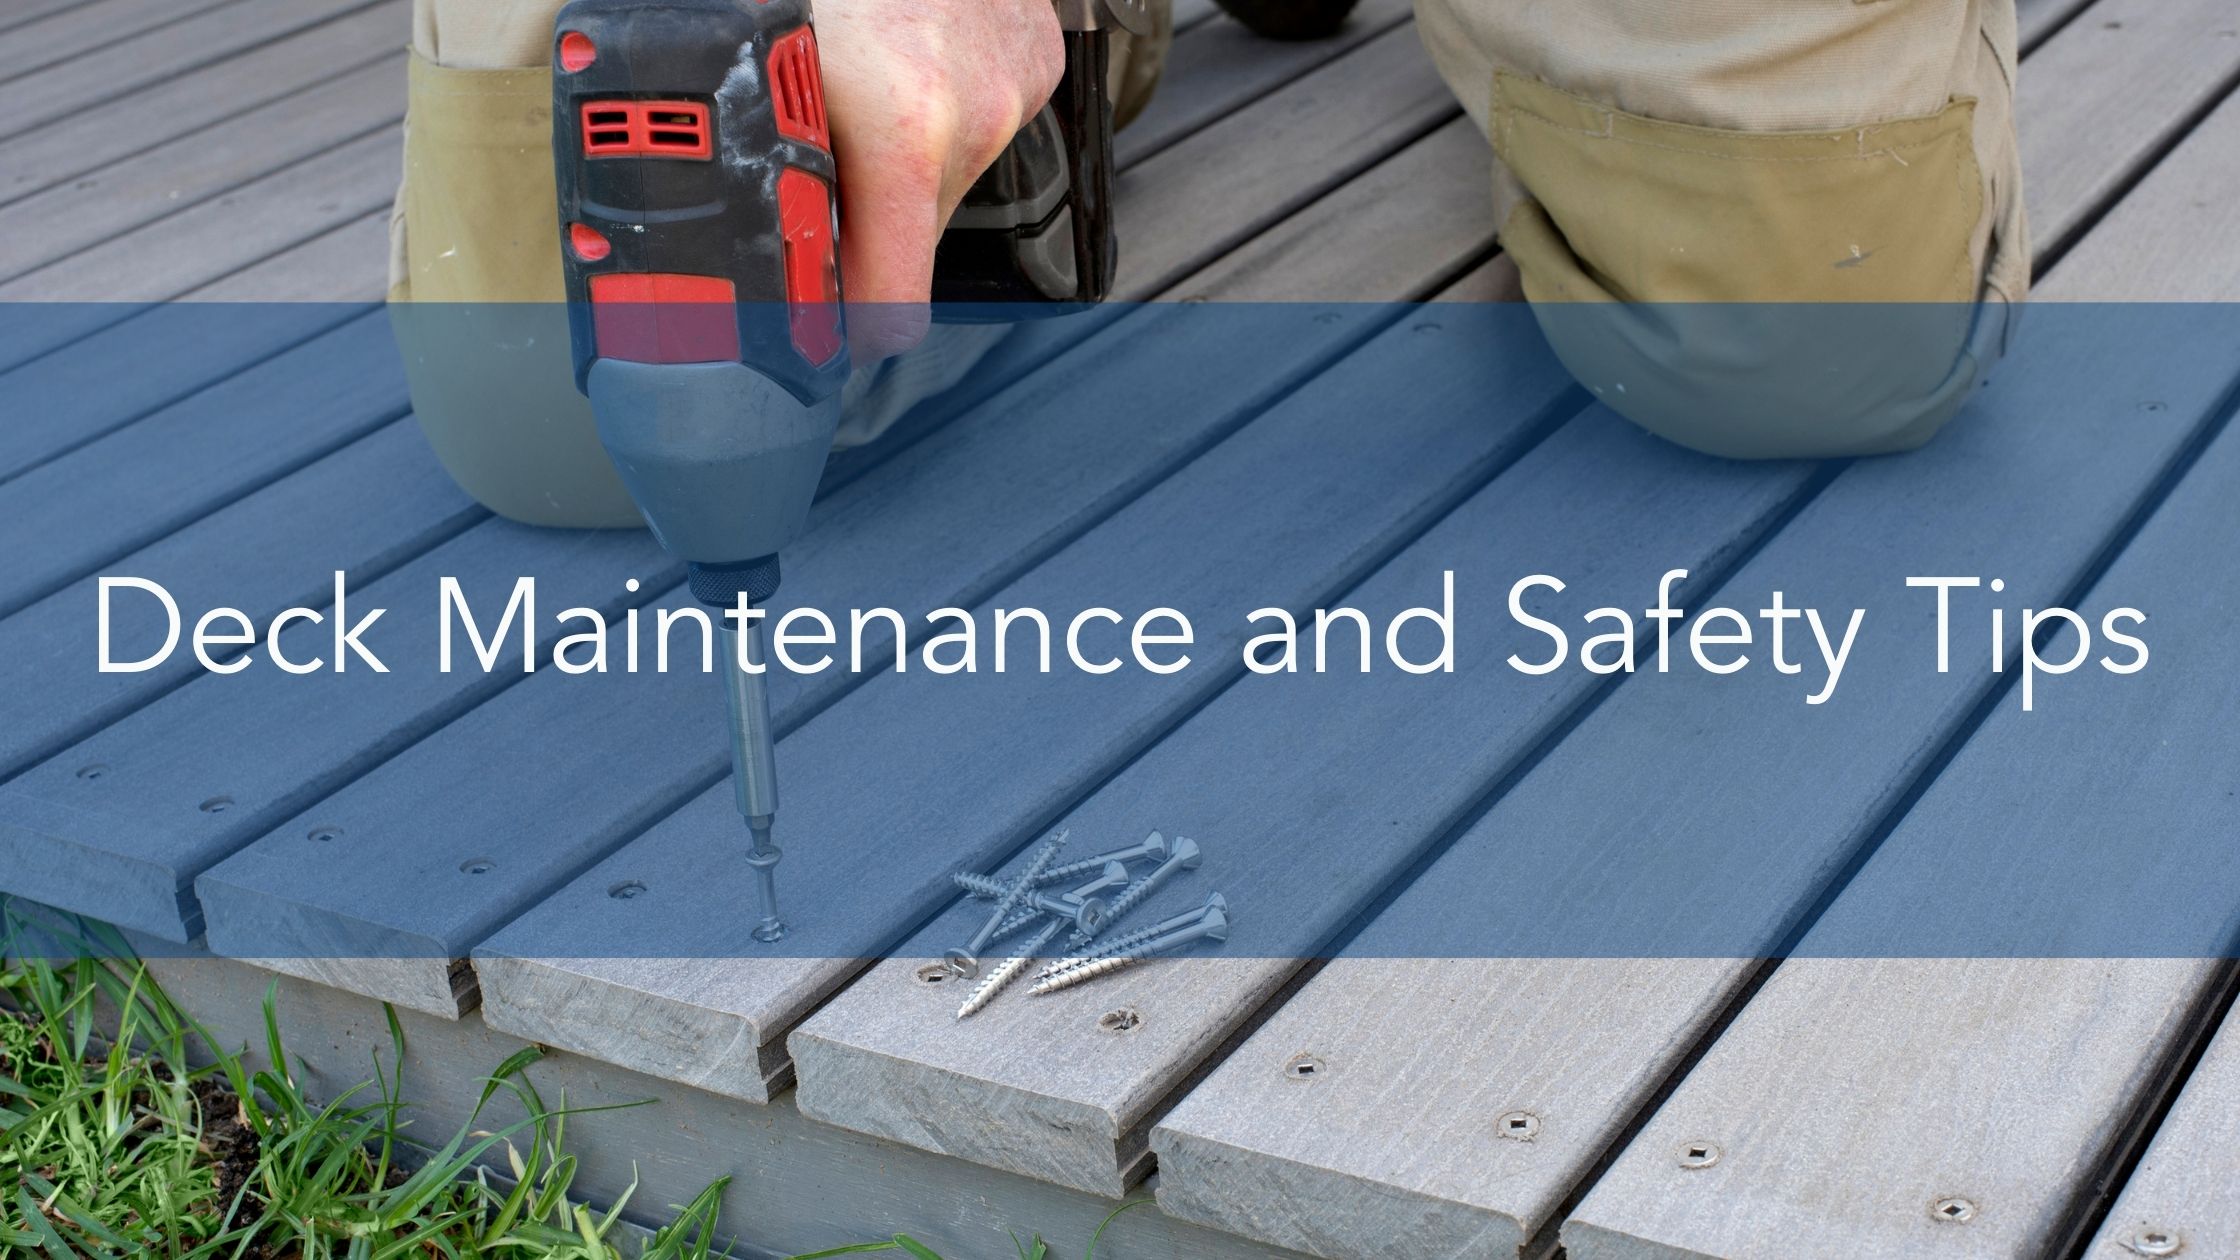 Deck Maintenance and Safety Tips